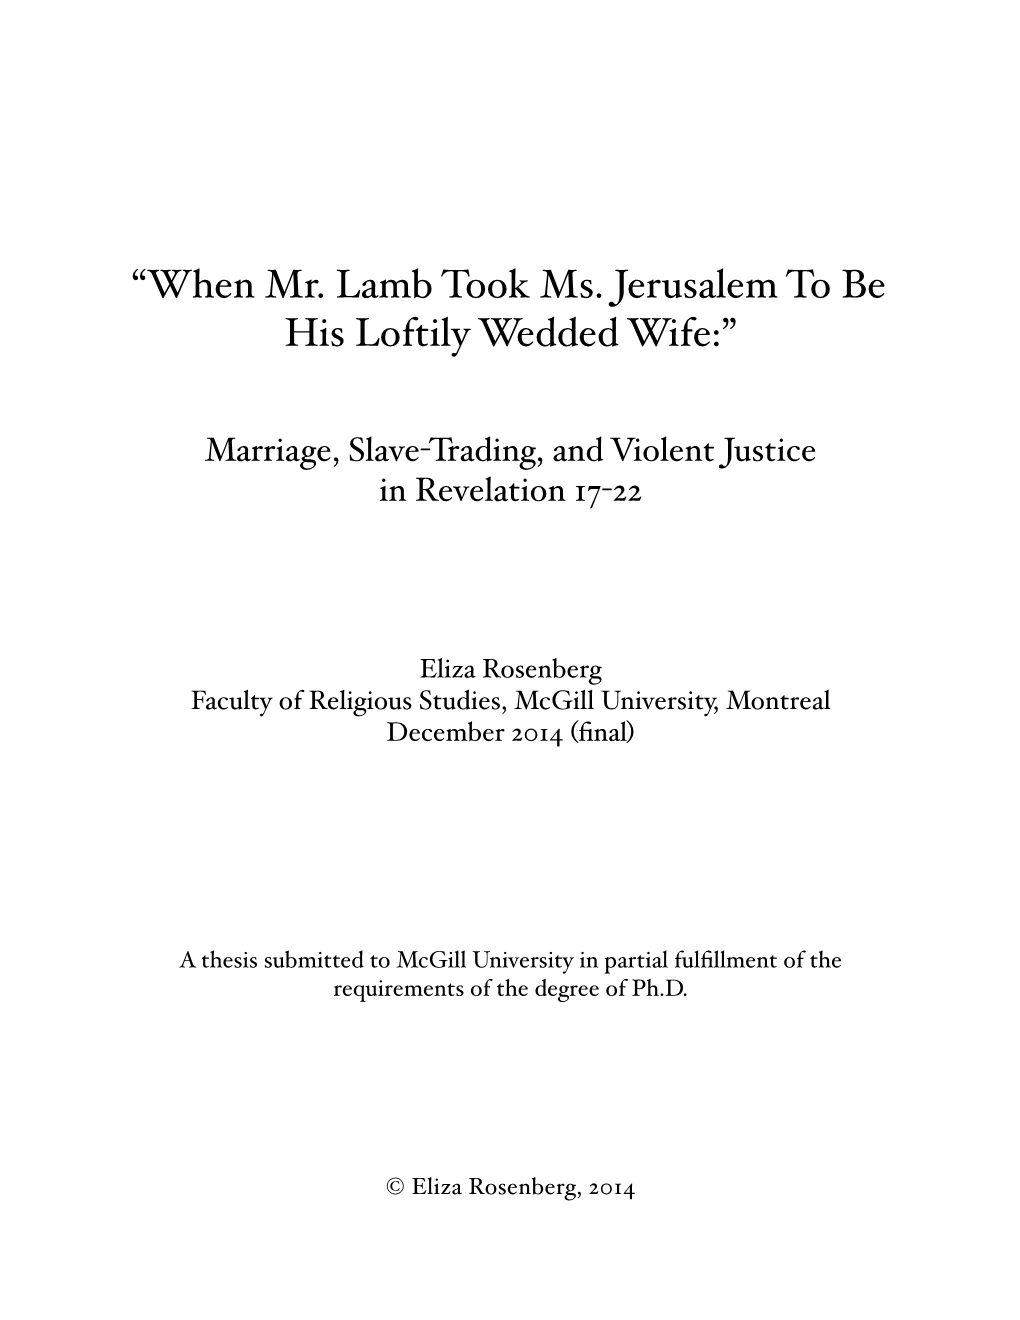 “When Mr. Lamb Took Ms. Jerusalem to Be His Loftily Wedded Wife:”